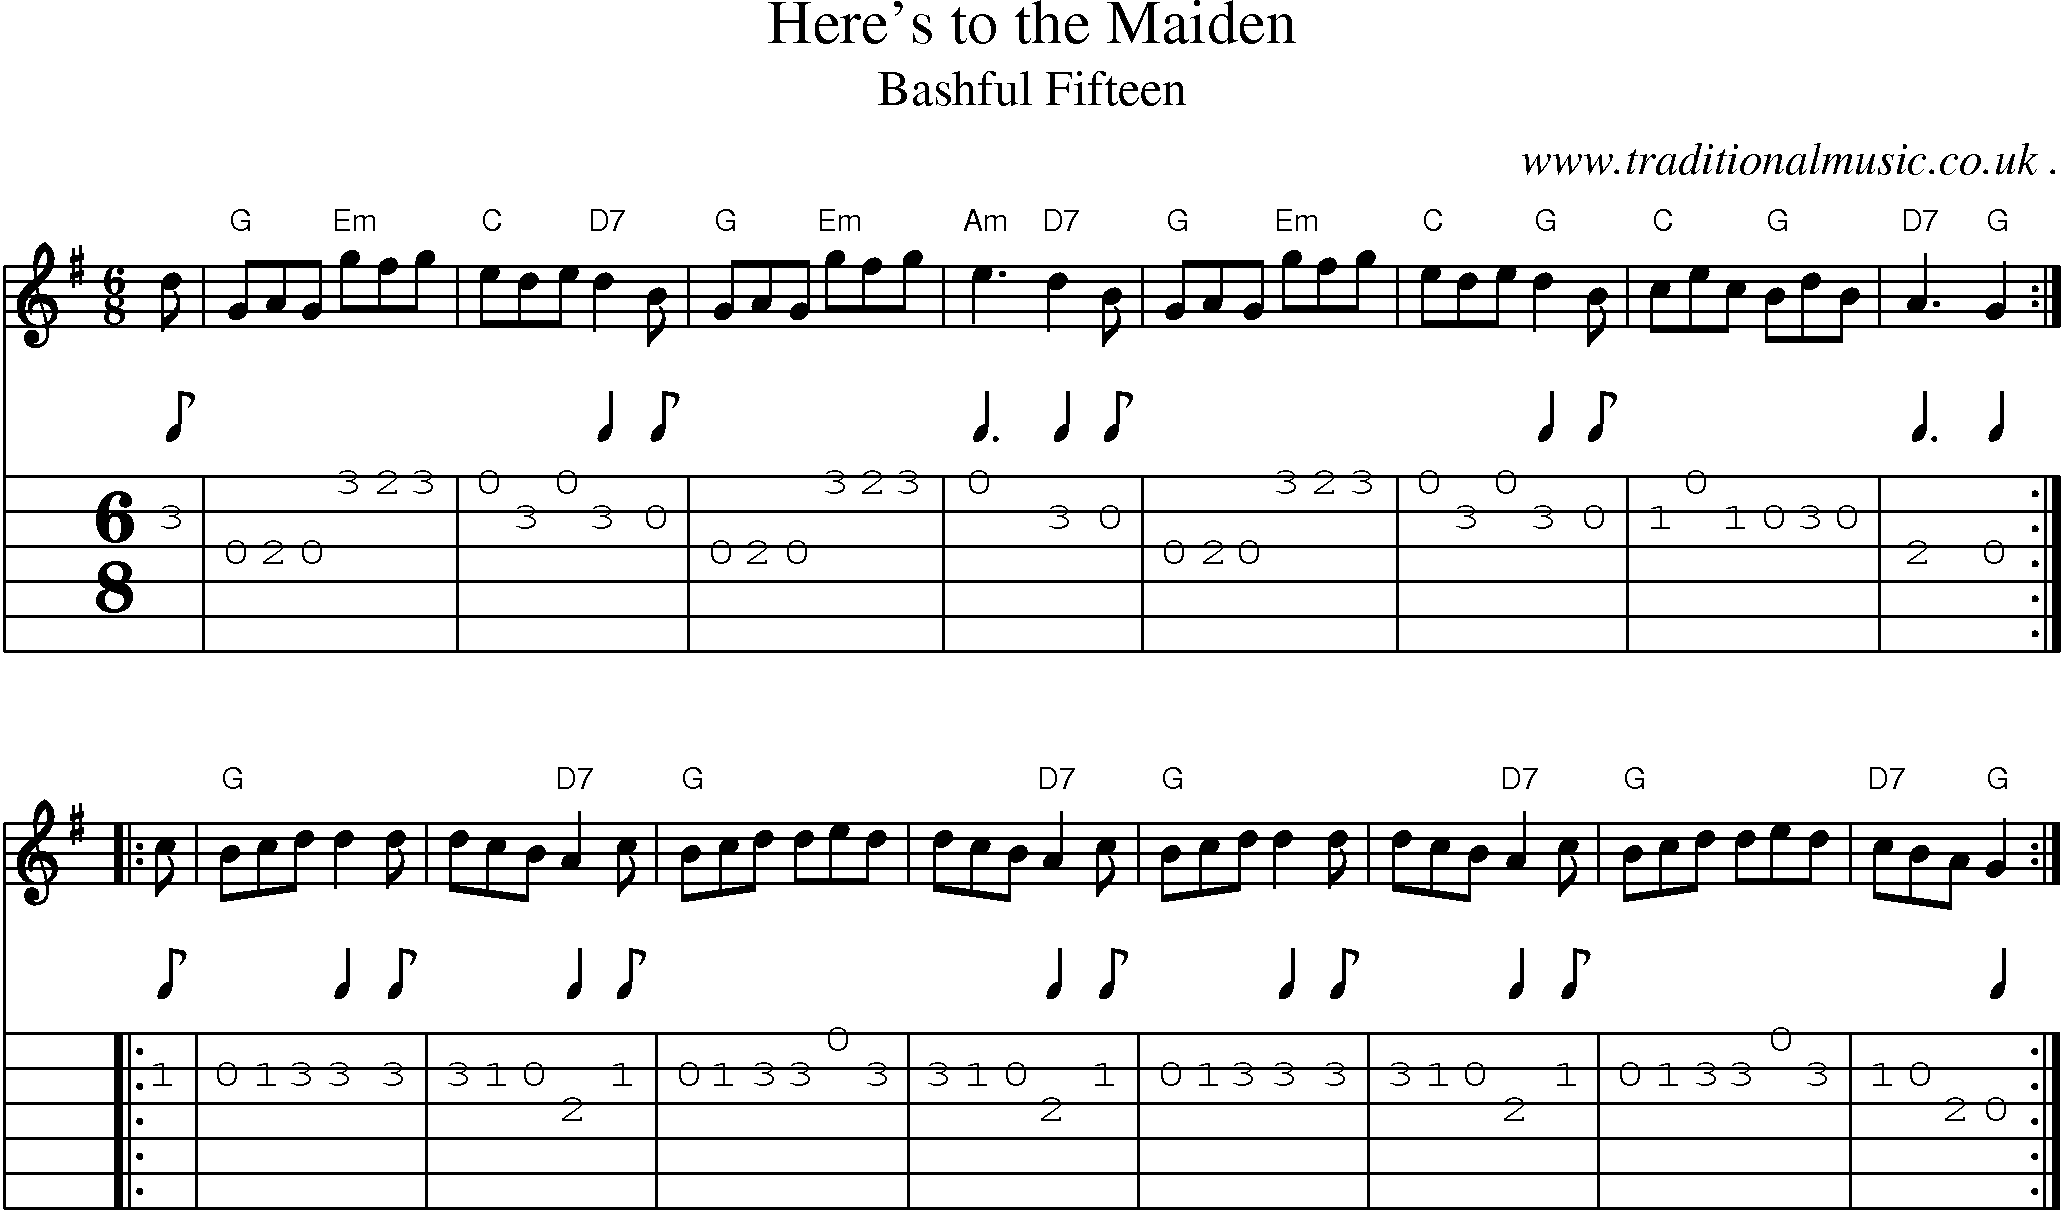 Sheet-music  score, Chords and Guitar Tabs for Heres To The Maiden